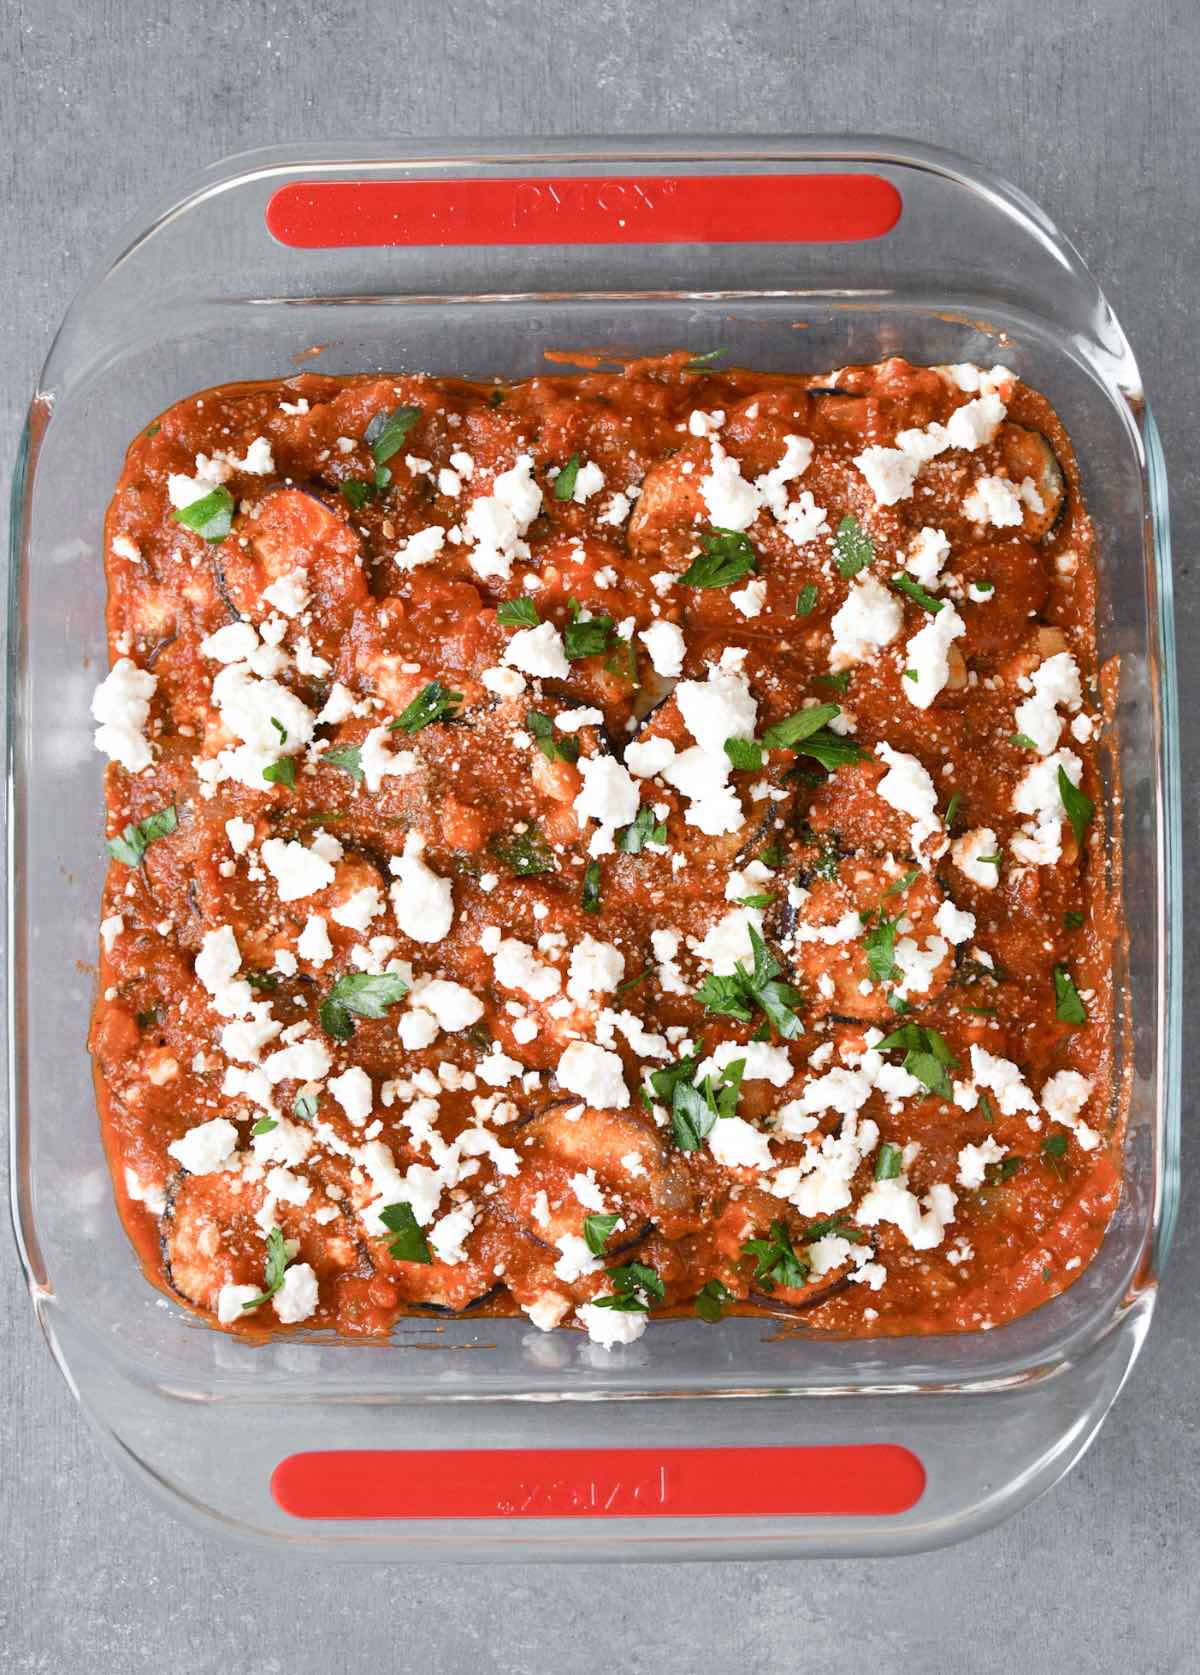 layers of cooked eggplant, tomato sauce, feta and parsley in a baking dish.